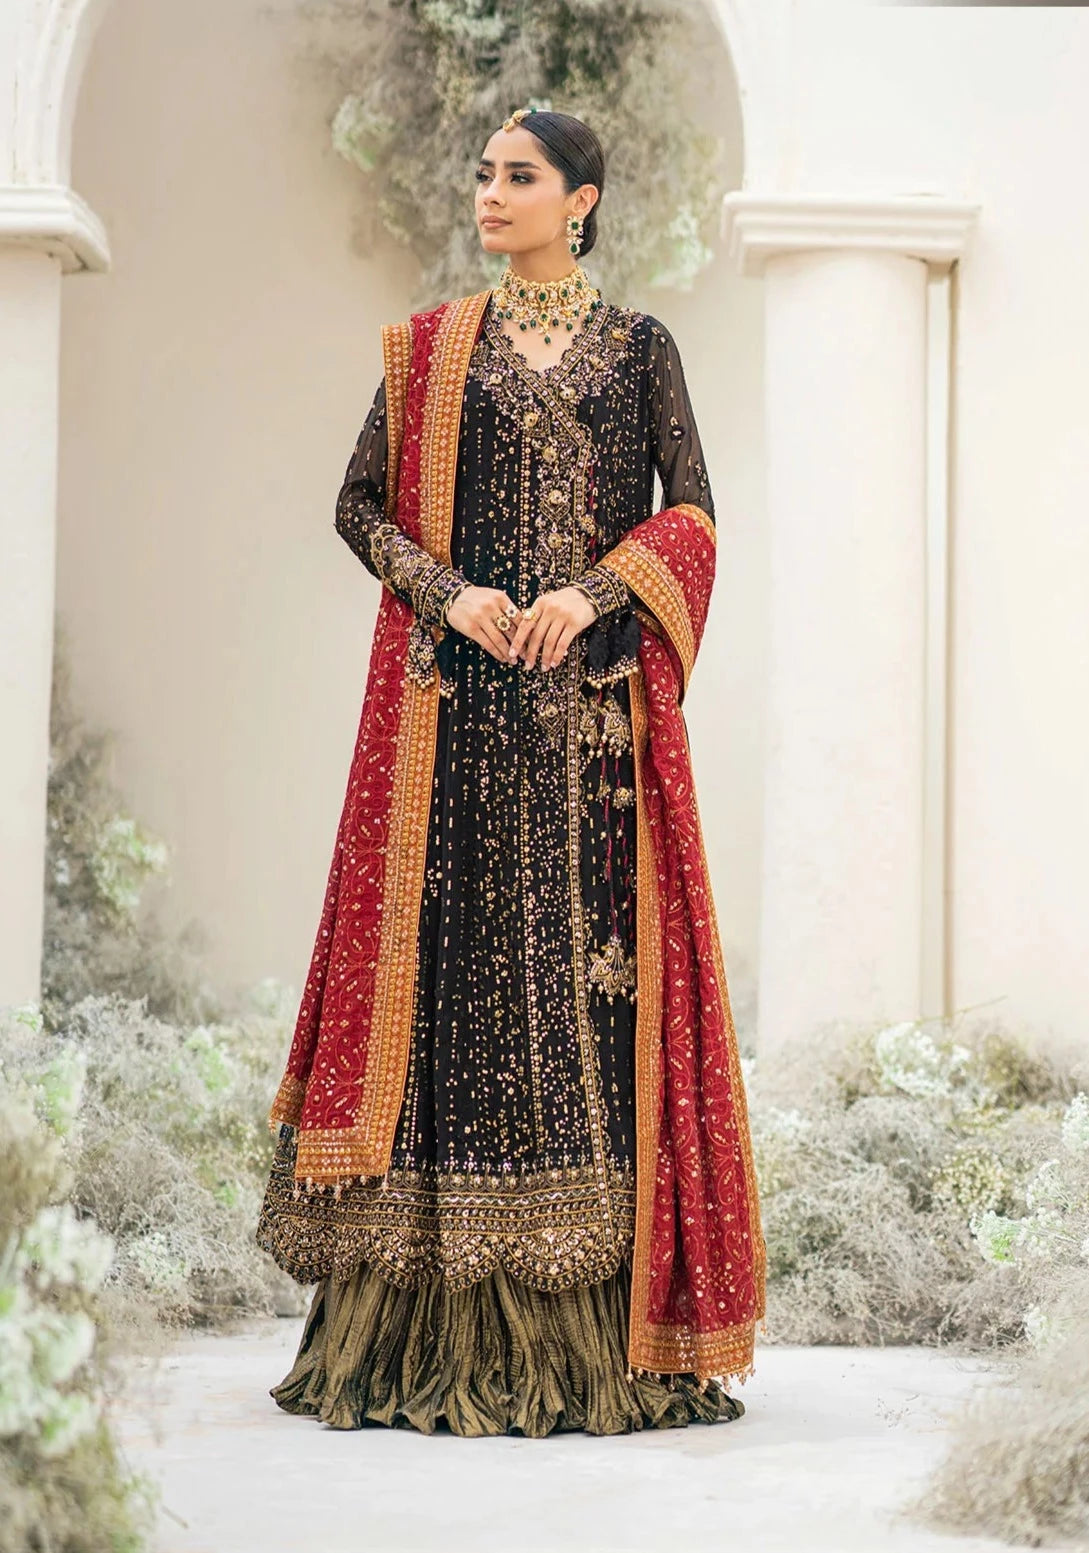 Aik Atelier Formal Angrakha Inspired Embroidered 3 Piece Wedding Outfit - Desi Posh